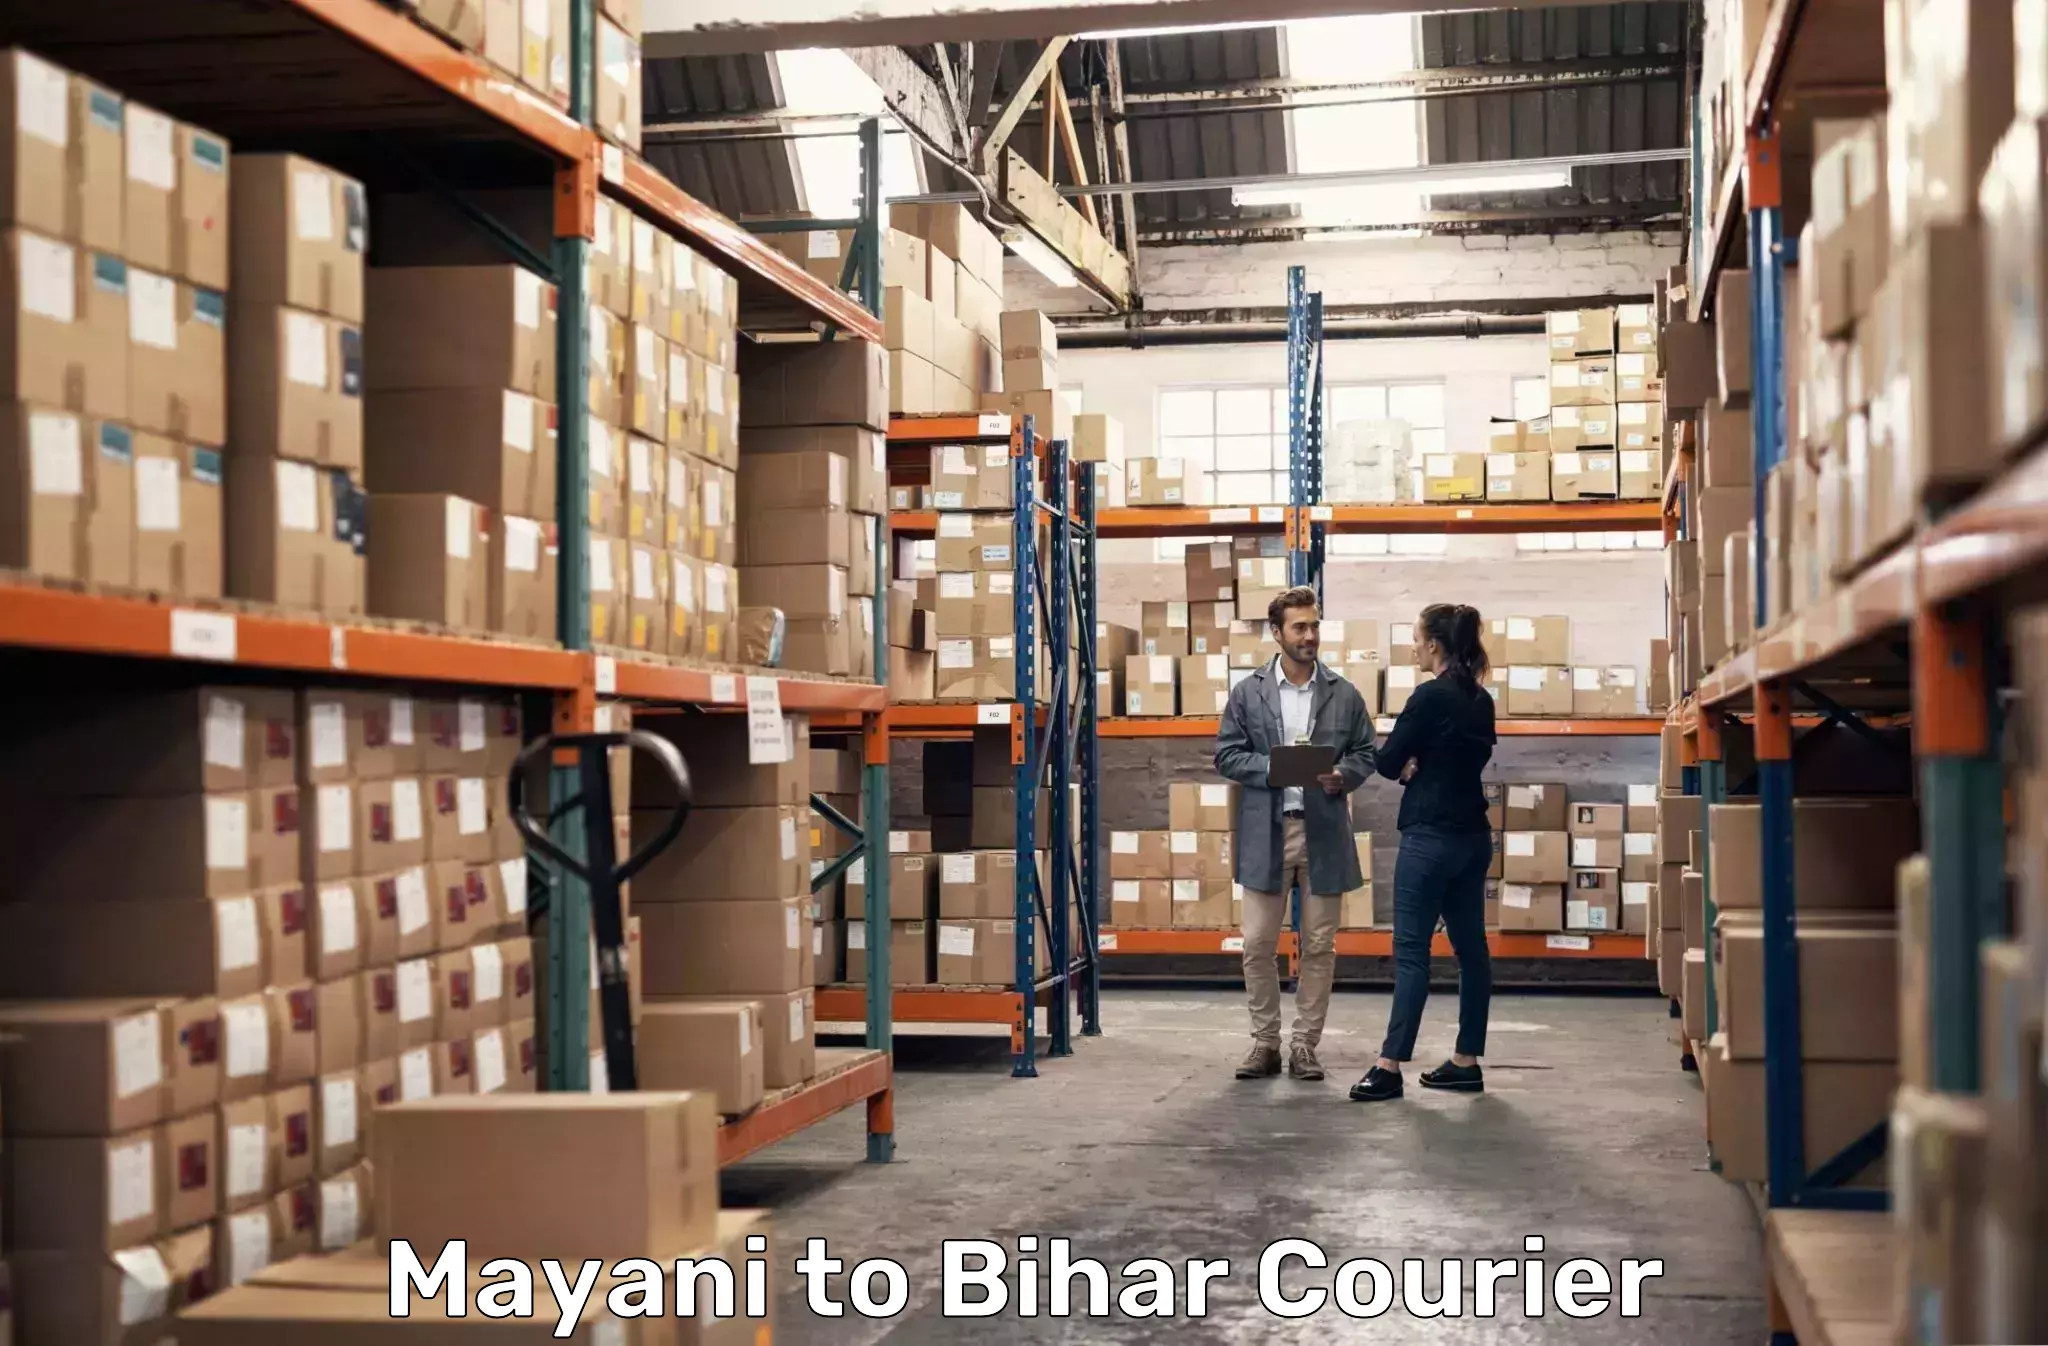 Flexible delivery scheduling Mayani to Bhawanipur Rajdham